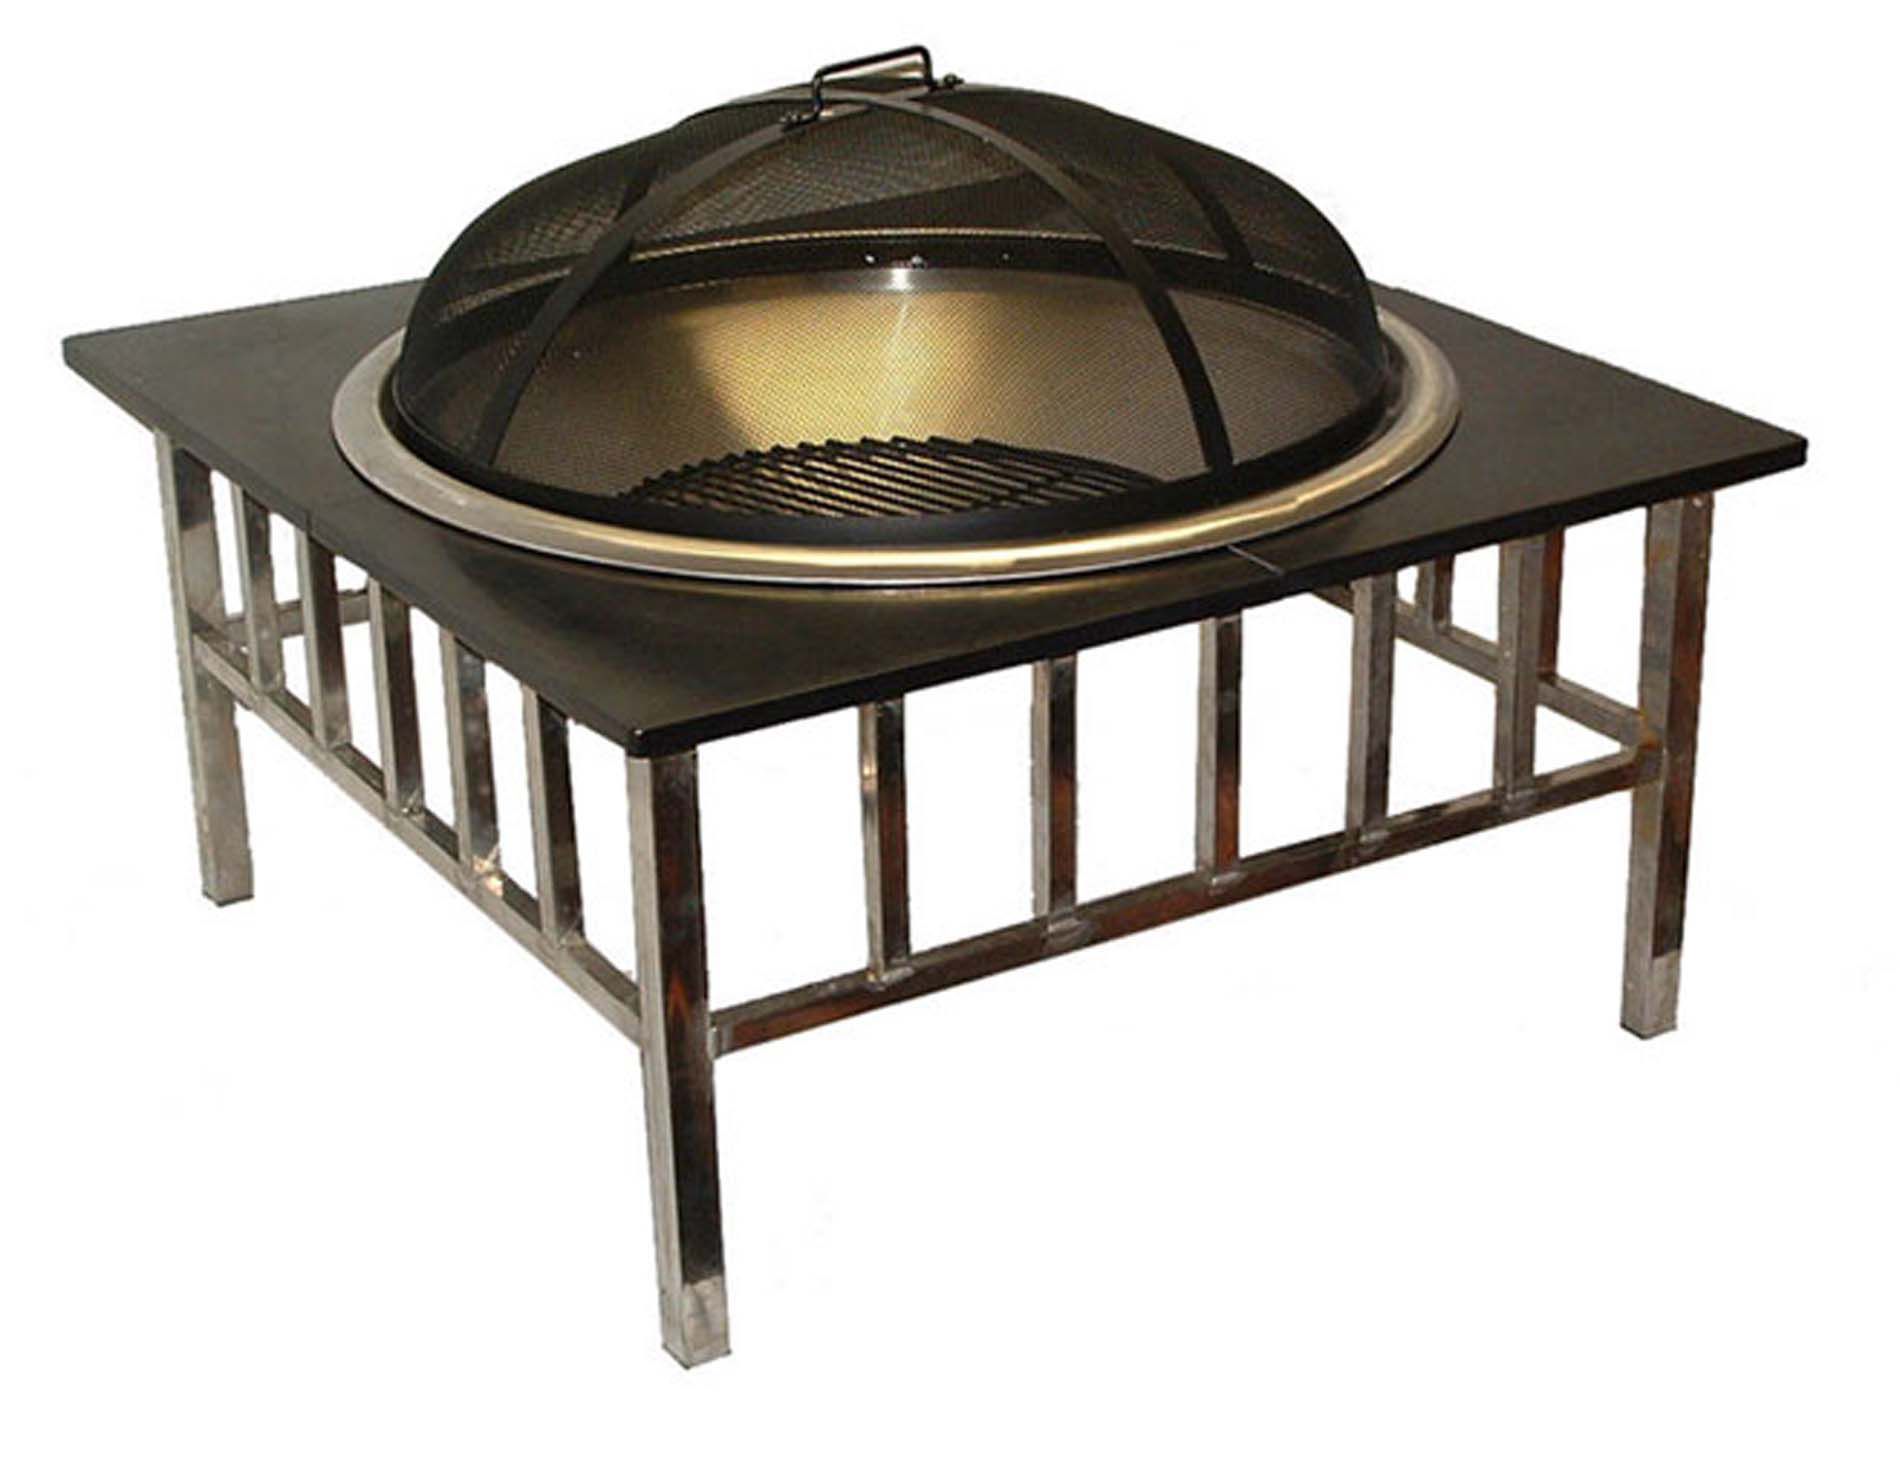 Fire Sense Outdoor table Firepit Stainless Steel